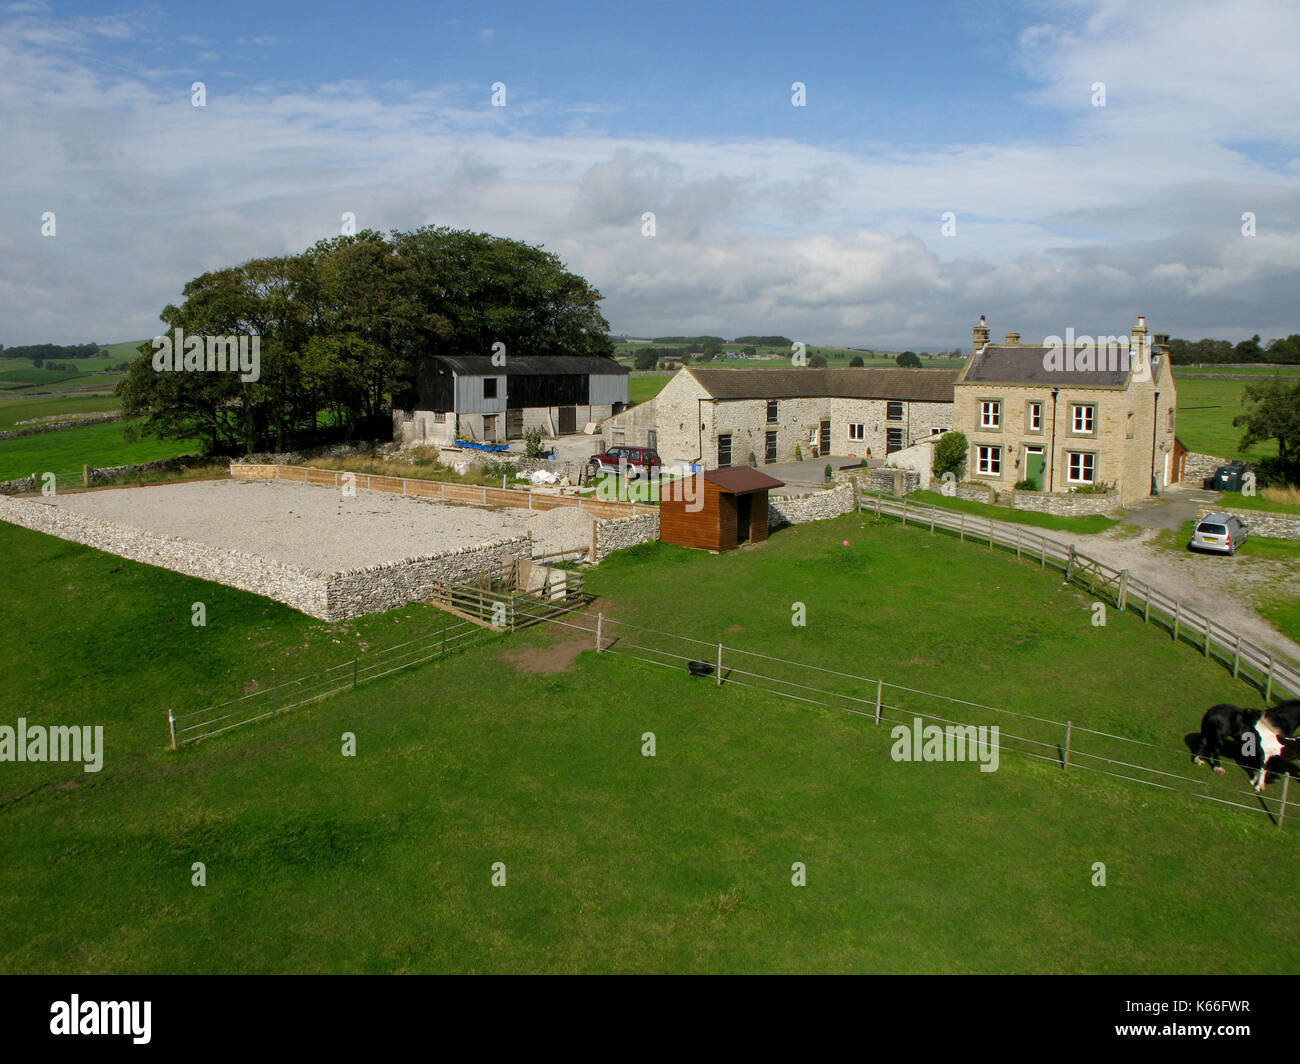 Wide view of Derbyshire farm with equestrian facilities Stock Photo